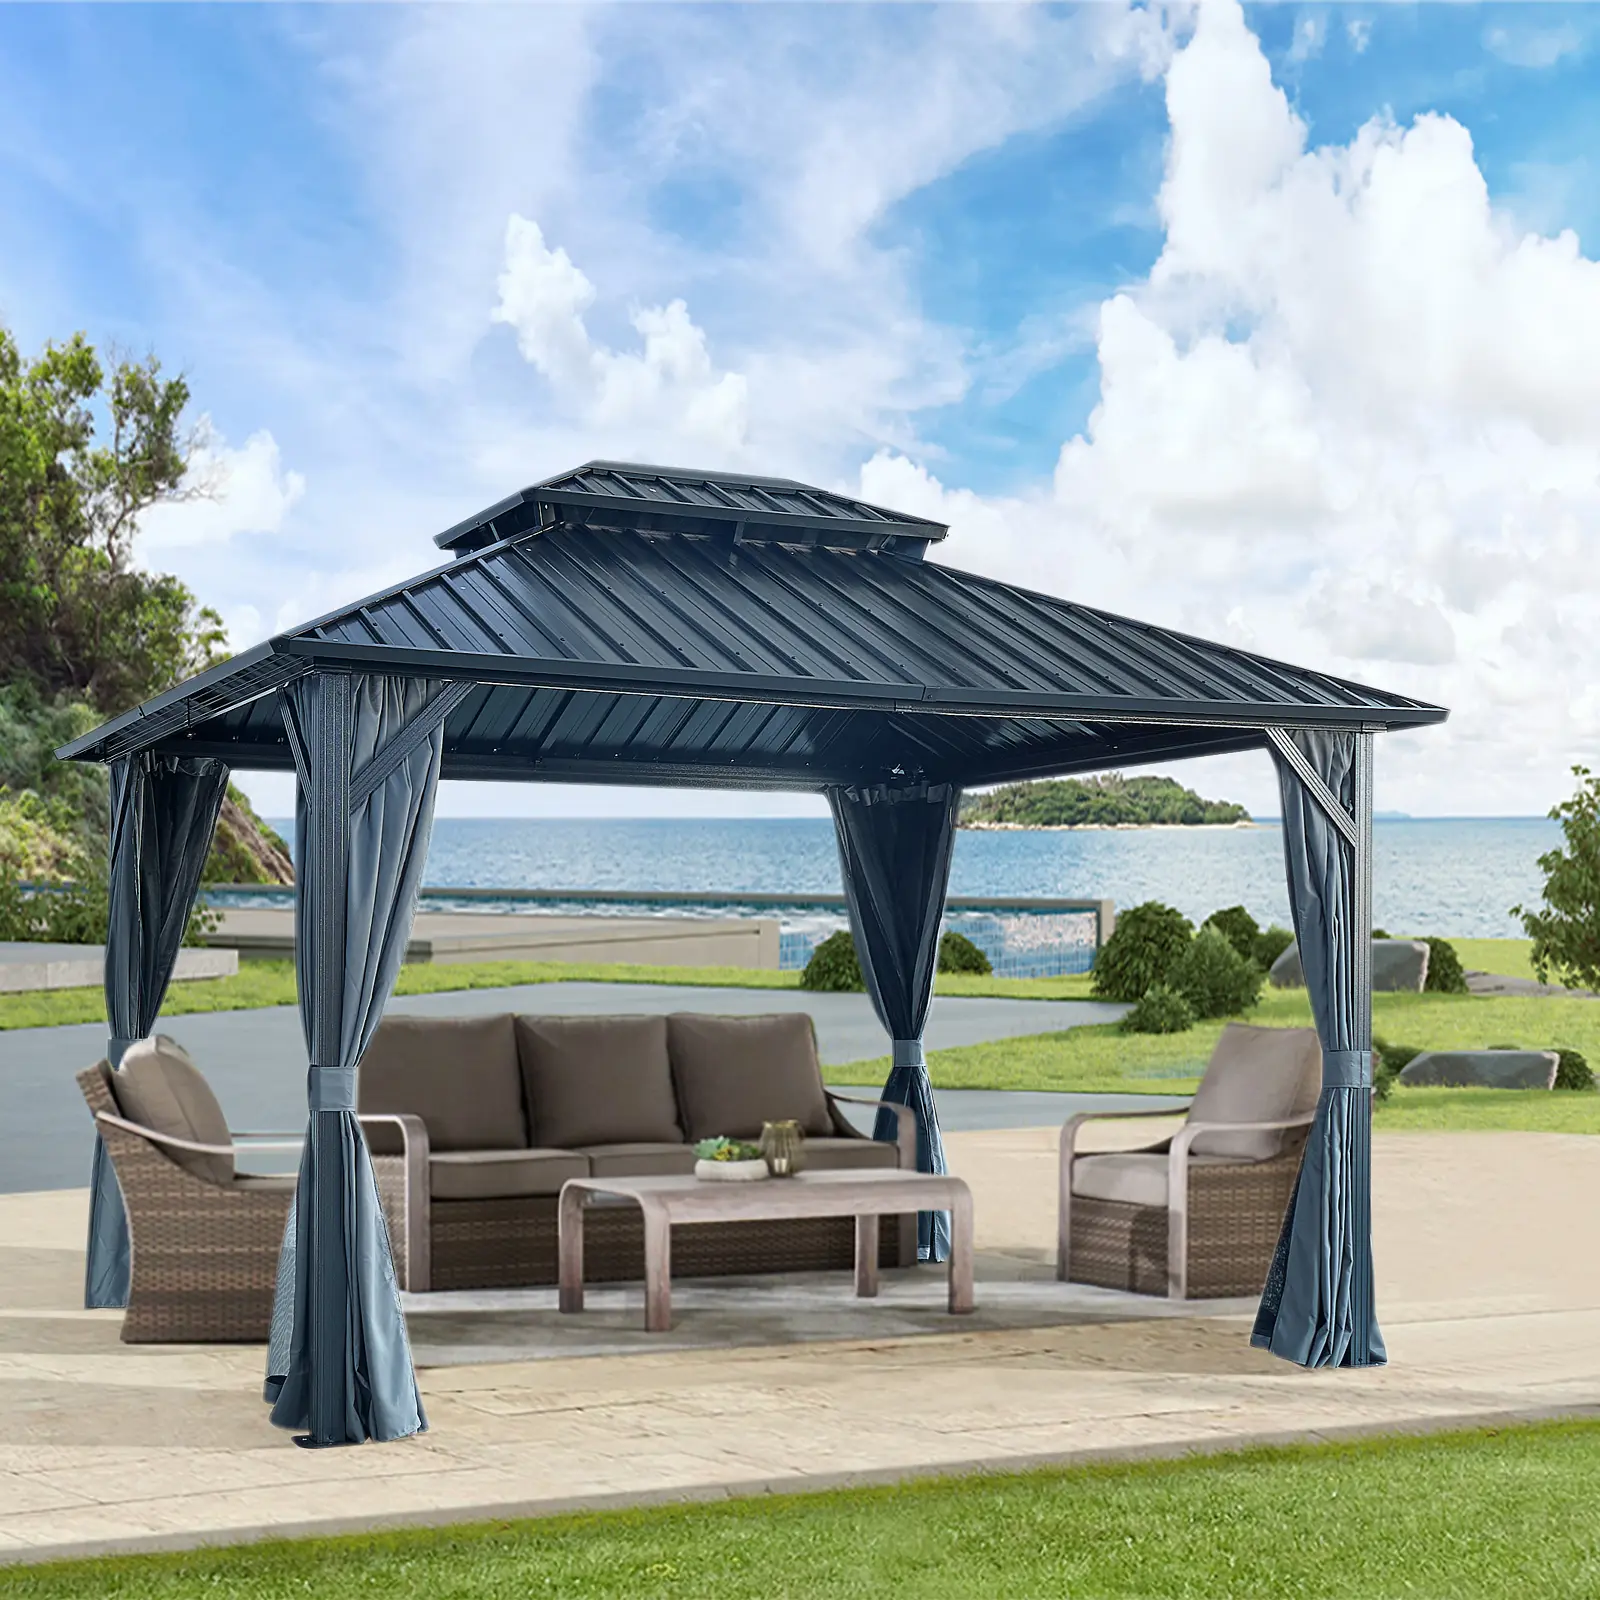 10x12 ft Galvanized Iron Aluminum Frame Double Hardtop Gazebo with Netting and Curtains for Patio